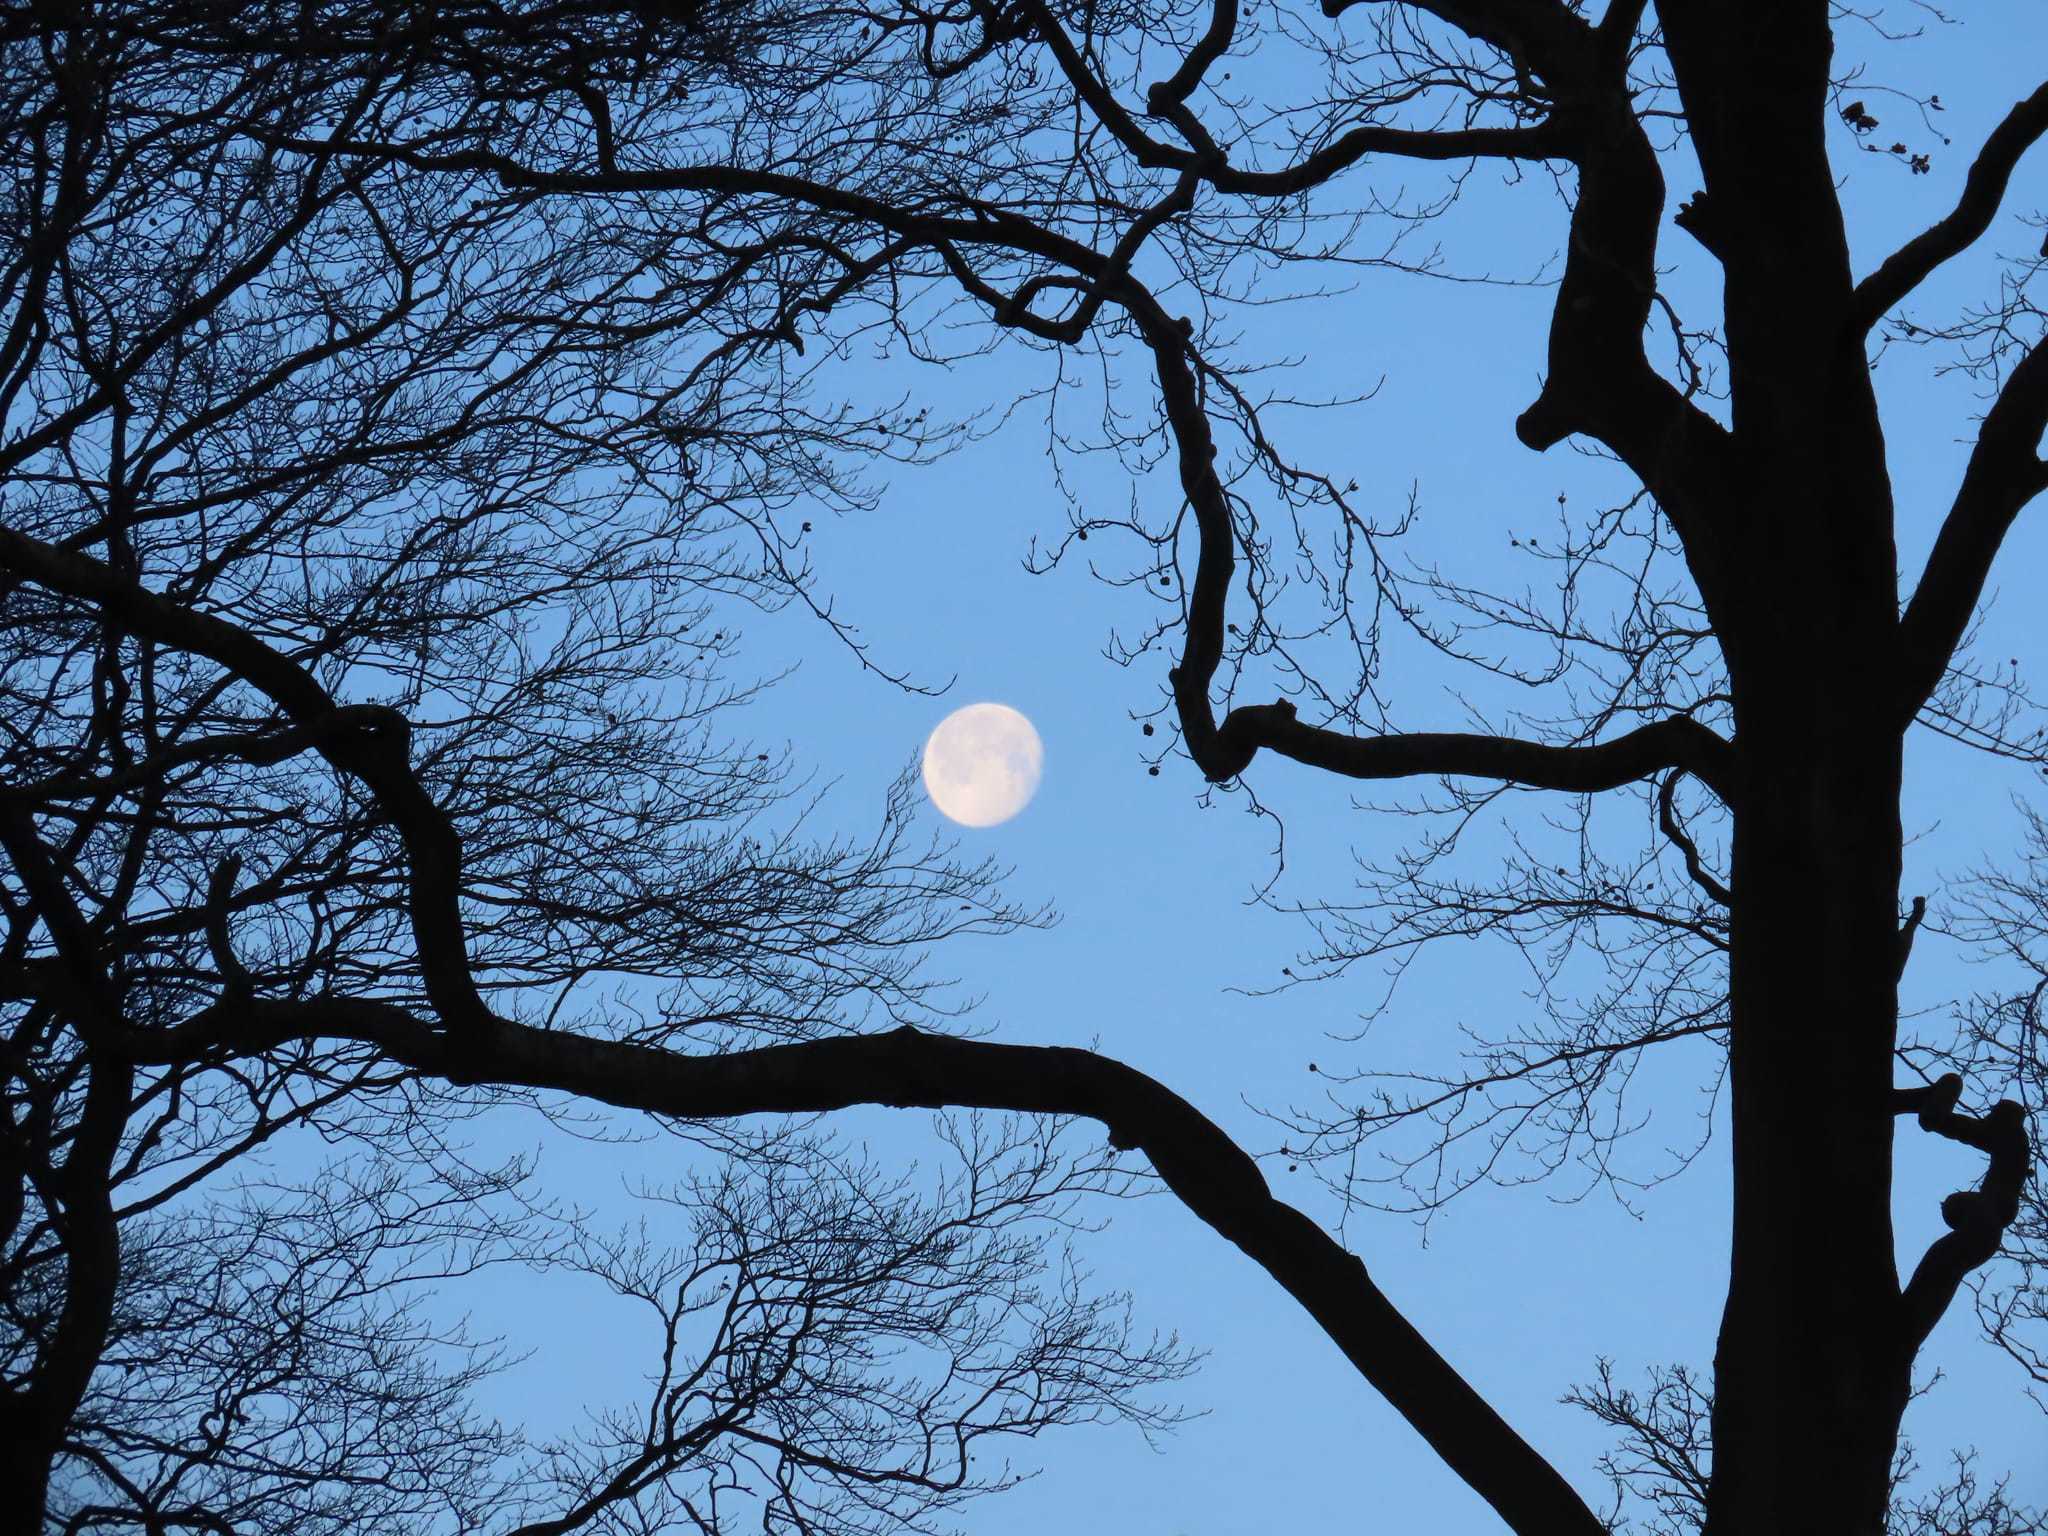 The moon over Sherdley Park by Suzy Makin